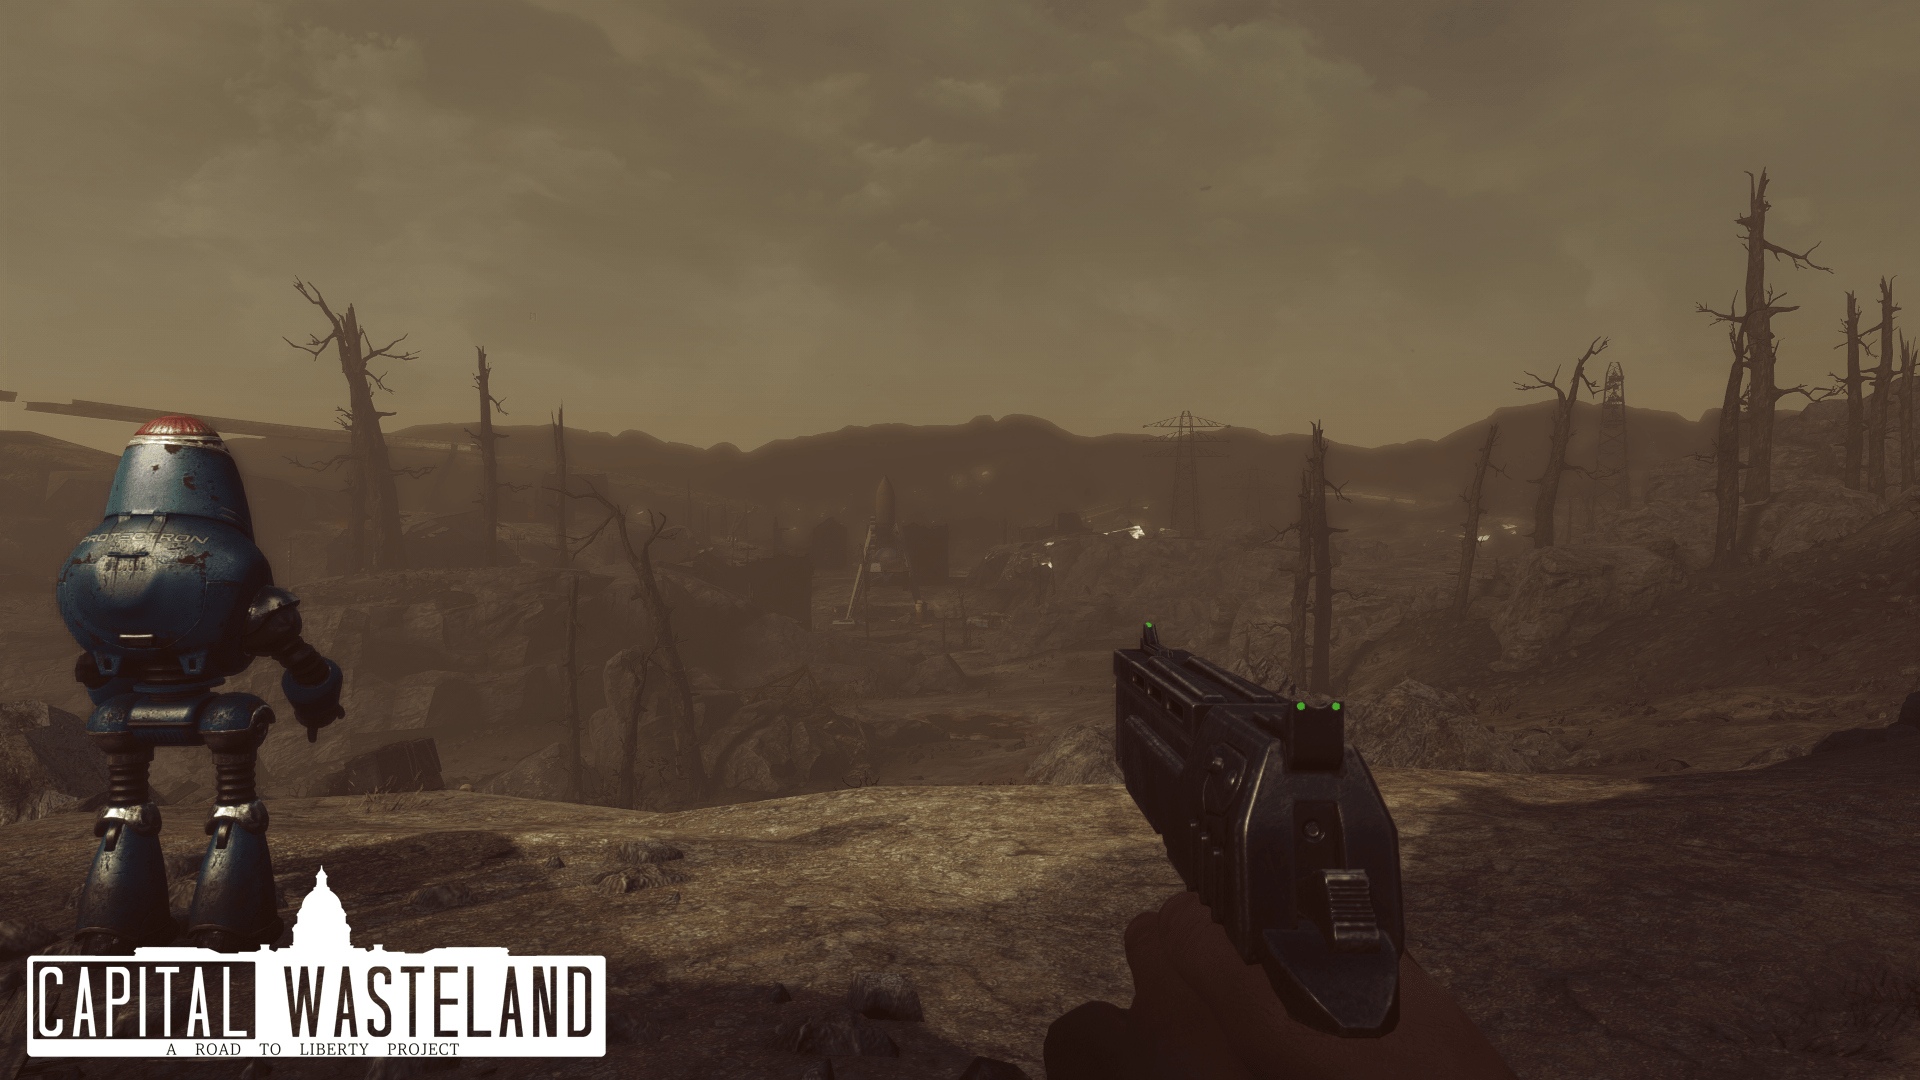 Fallout 3 Remake Mod Capital Wasteland Back in Development